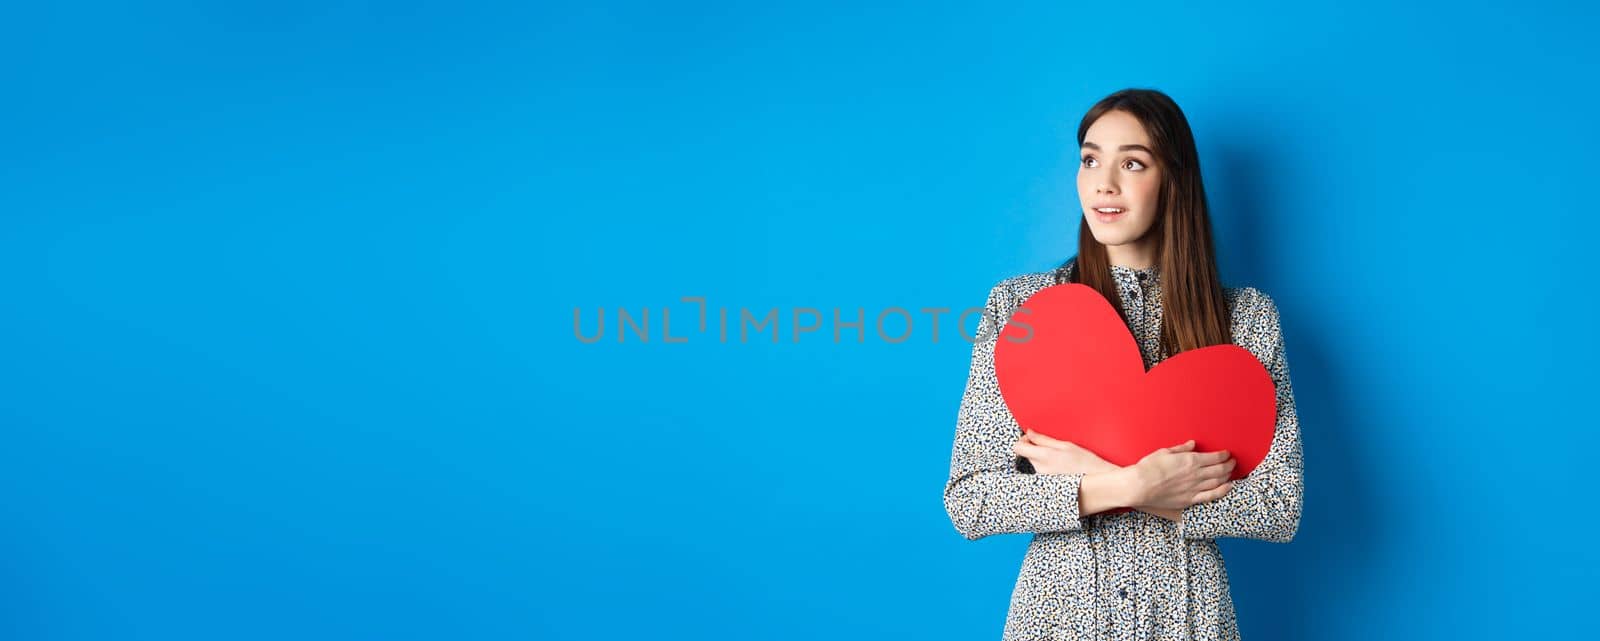 Valentines day. Hopeful girl dreaming off soulmate, looking aside at empty space with excitement, hugging big red heart cutout, standing on blue background.